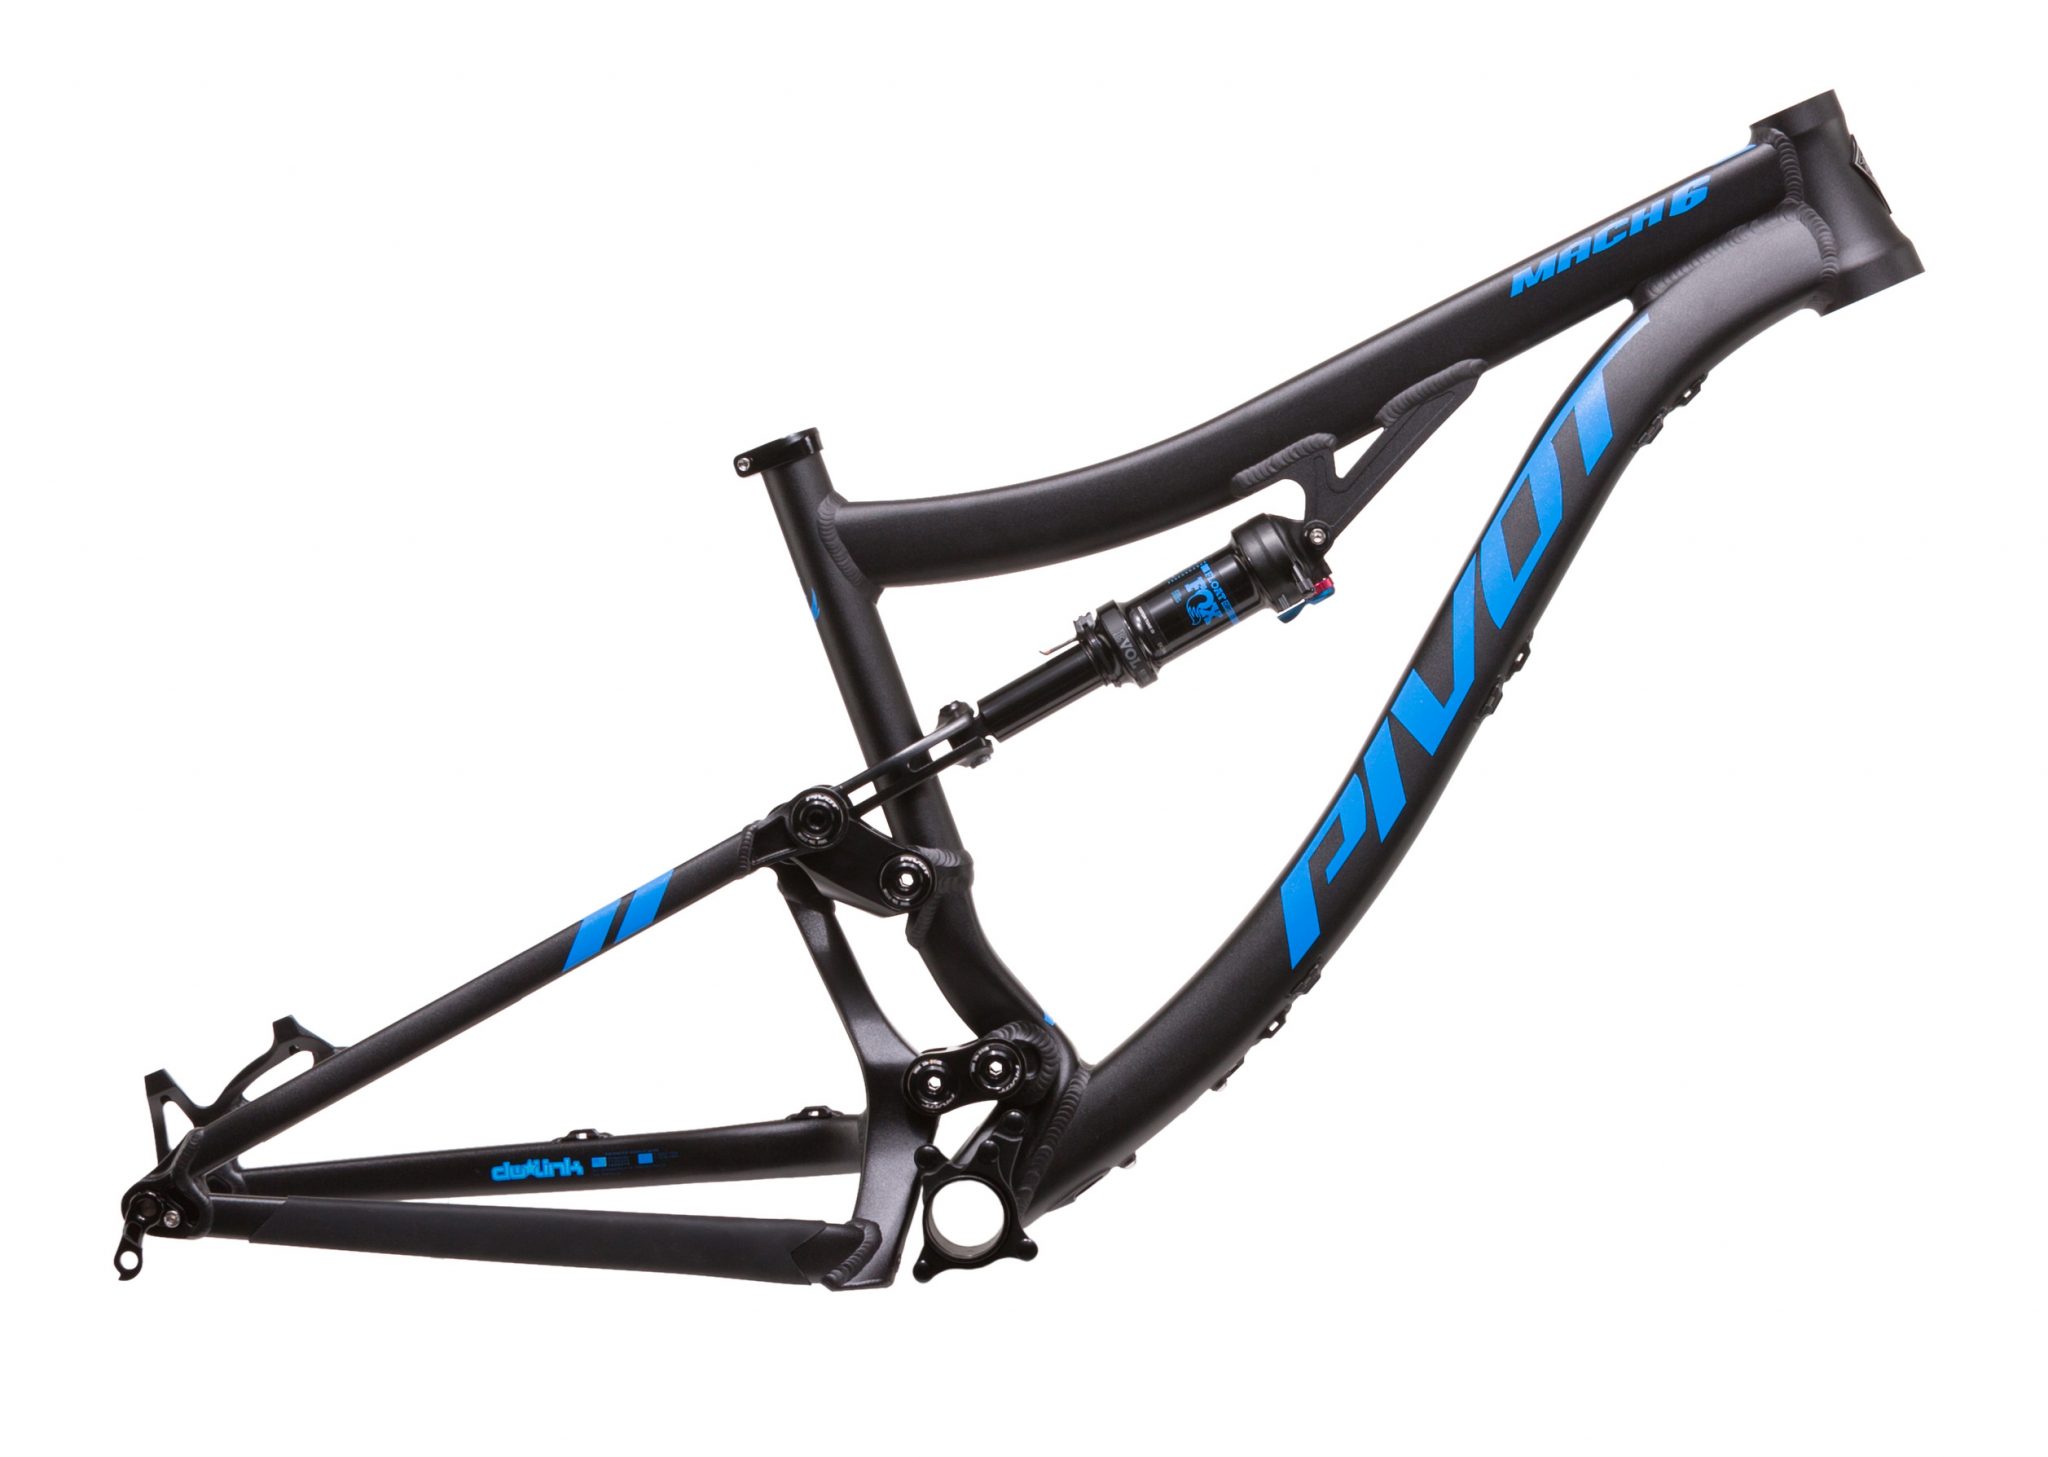 First Look – Pivot launches new Mach 6 in both Carbon and Aluminum ...